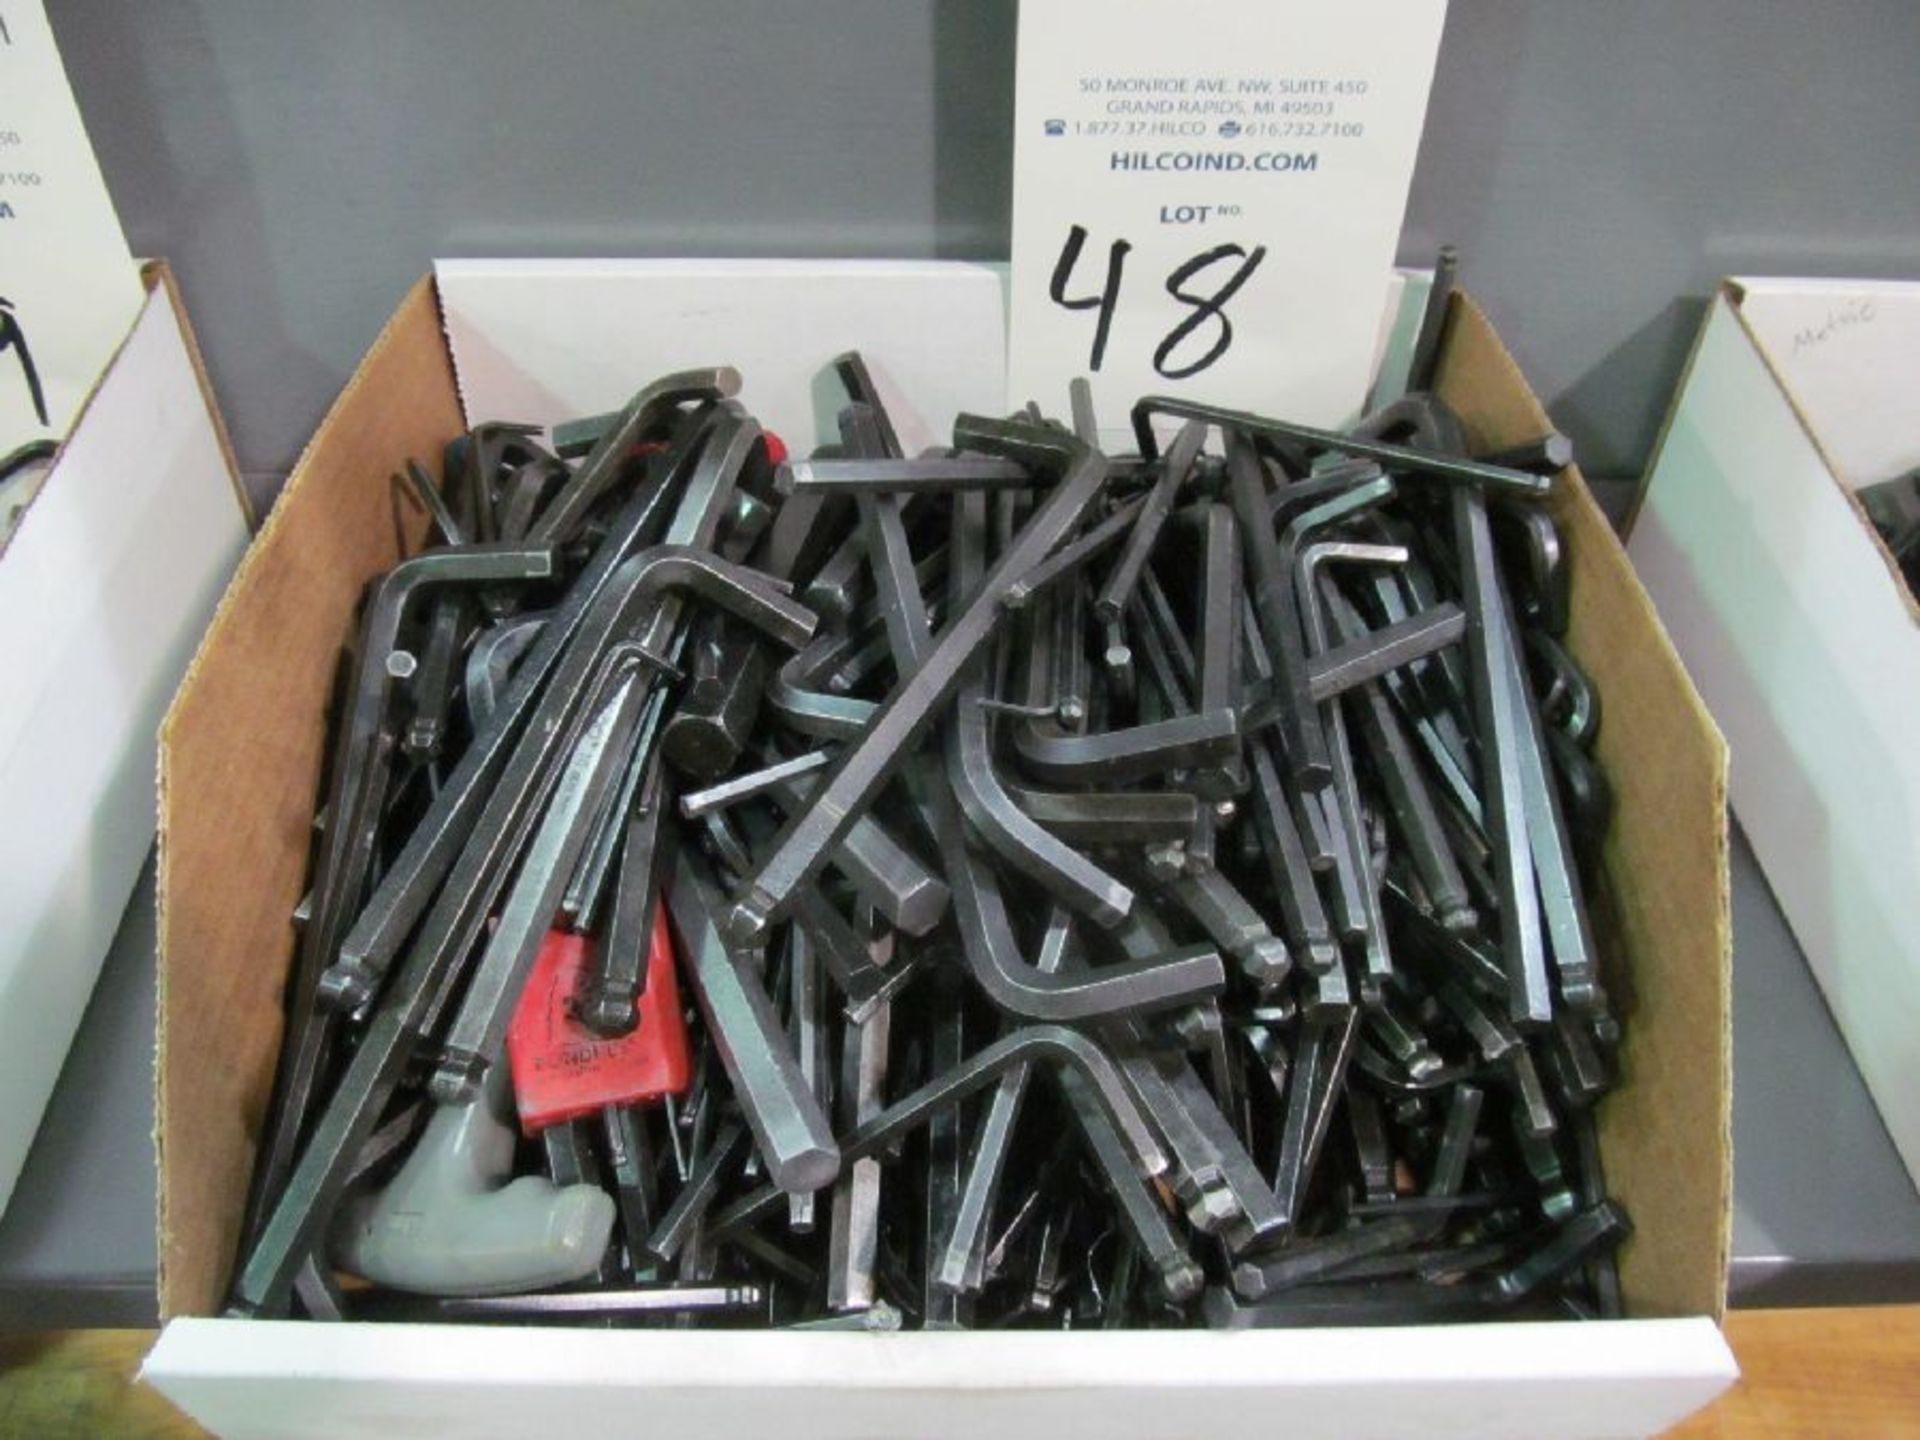 Hex Wrenches